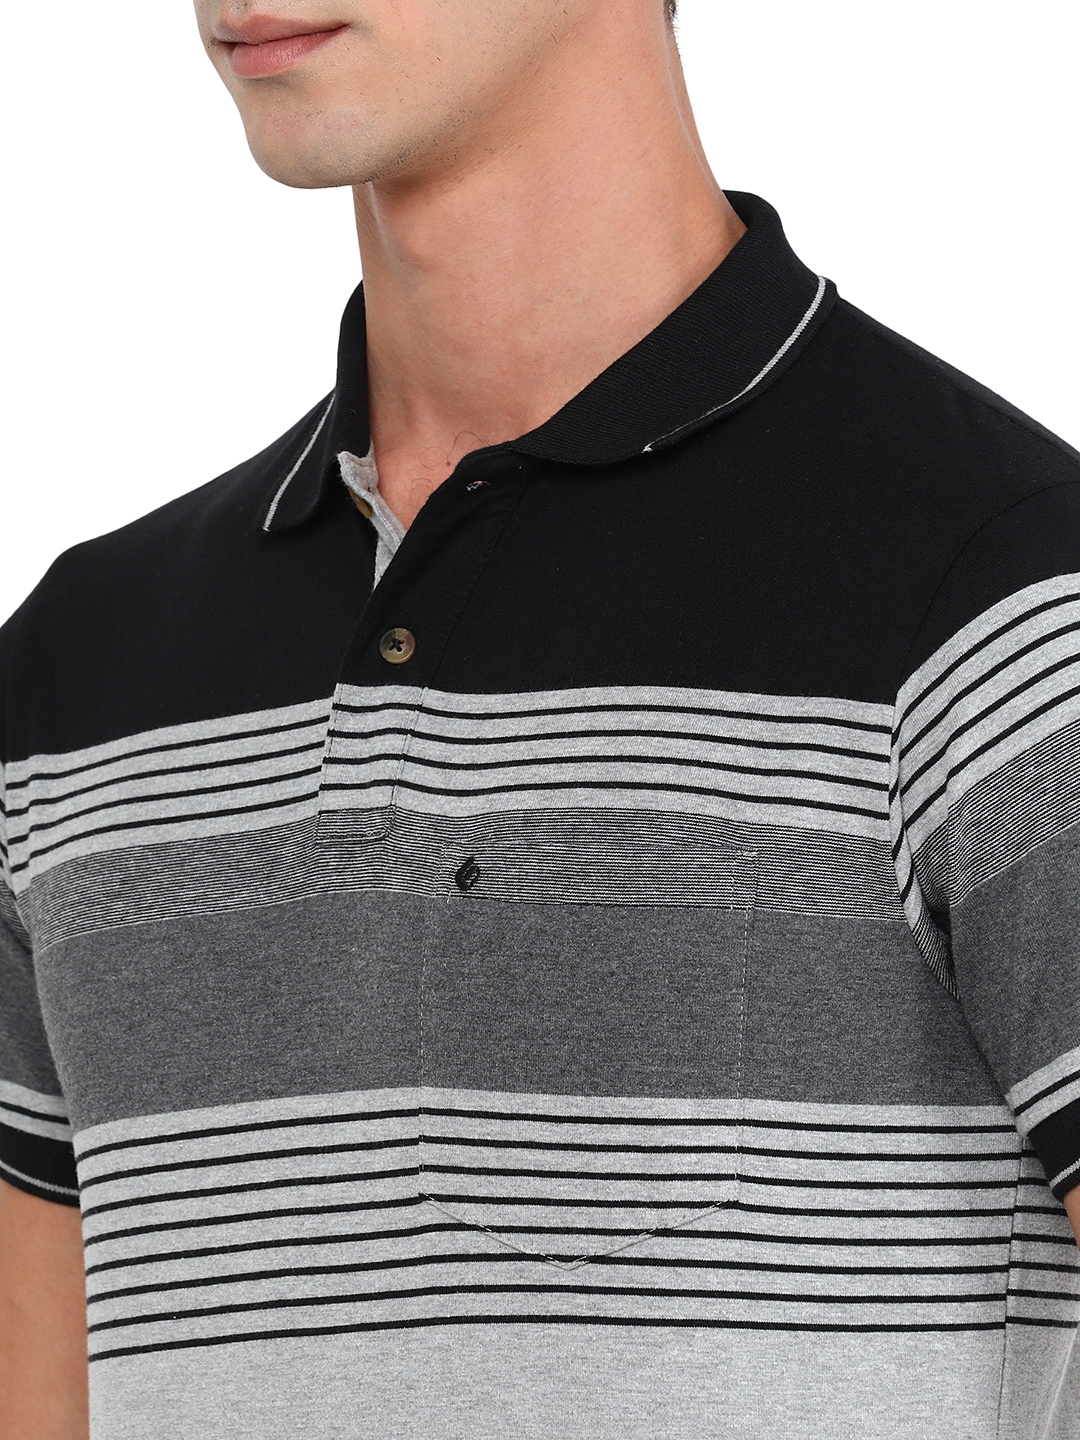 Greenfibre | Caster Grey Striped Slim Fit Polo T-Shirt | Greenfibre 4